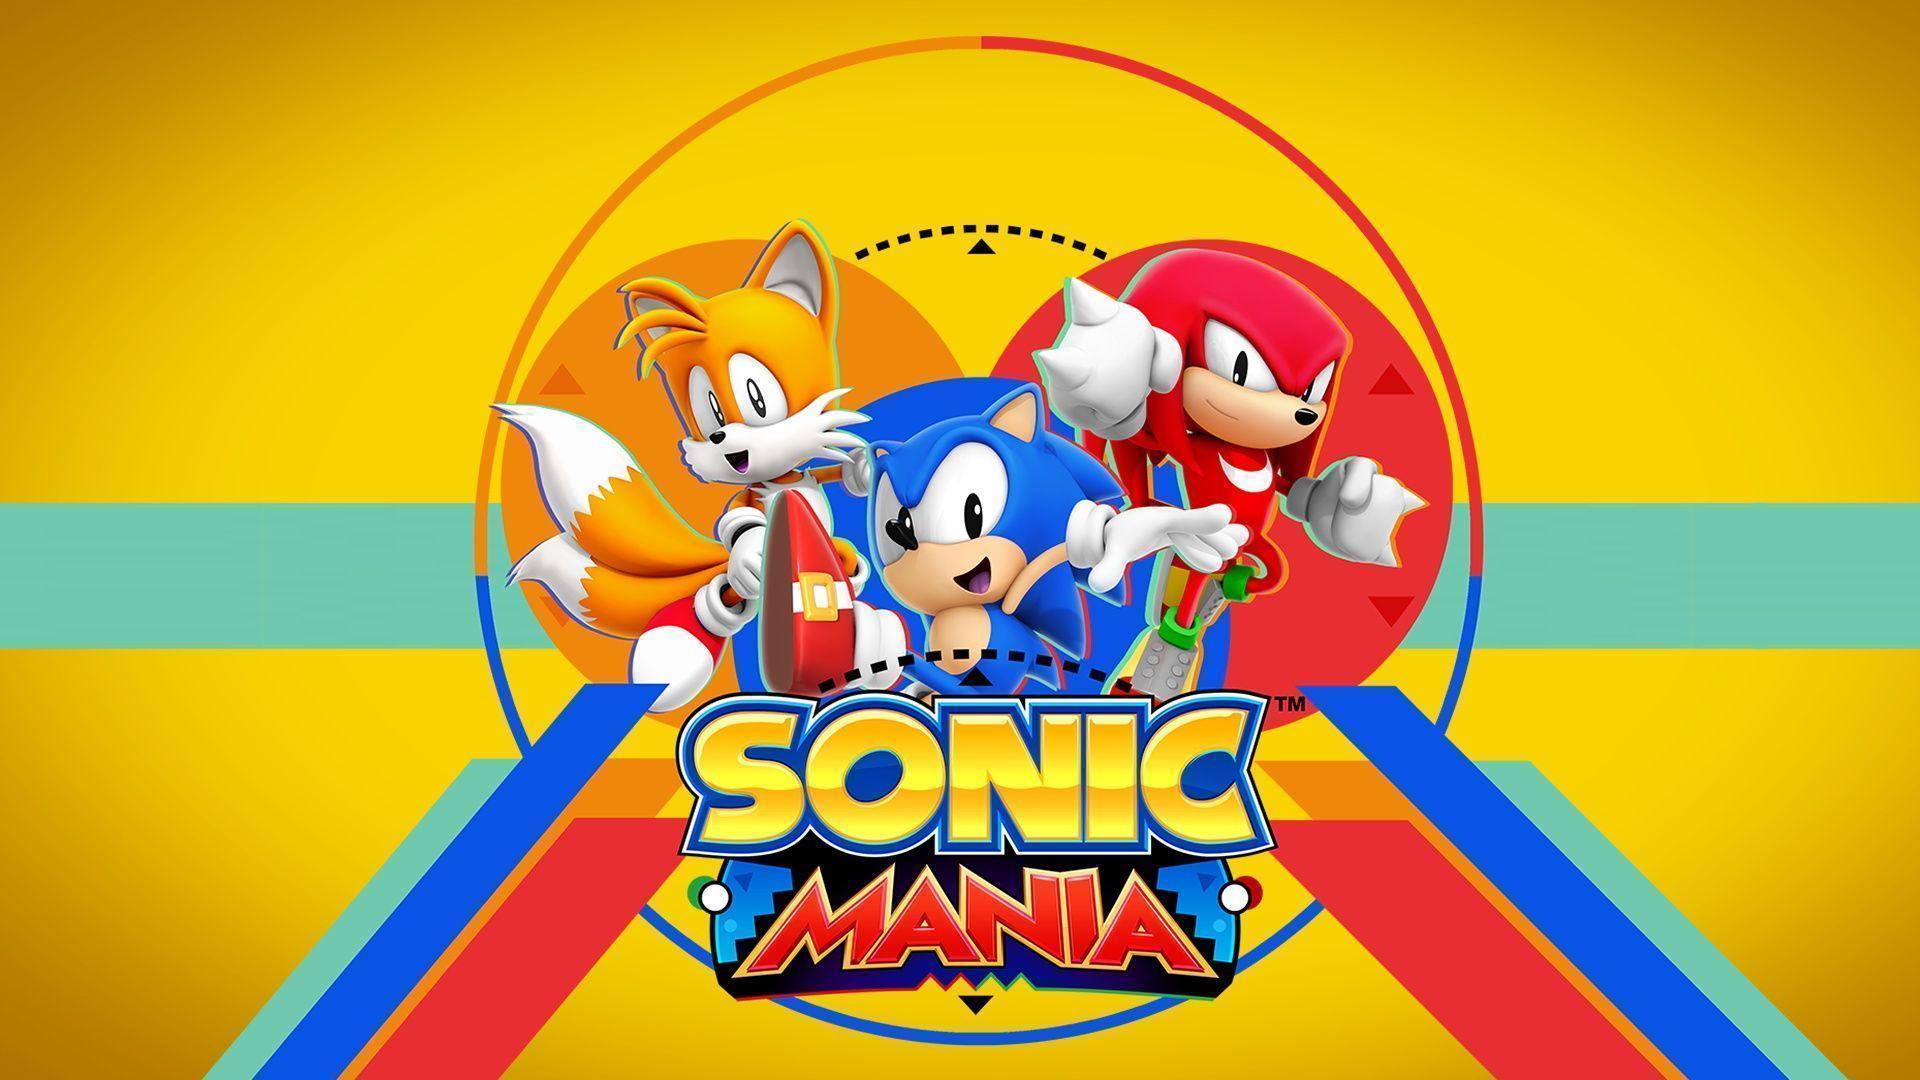 is sonic mania on steam